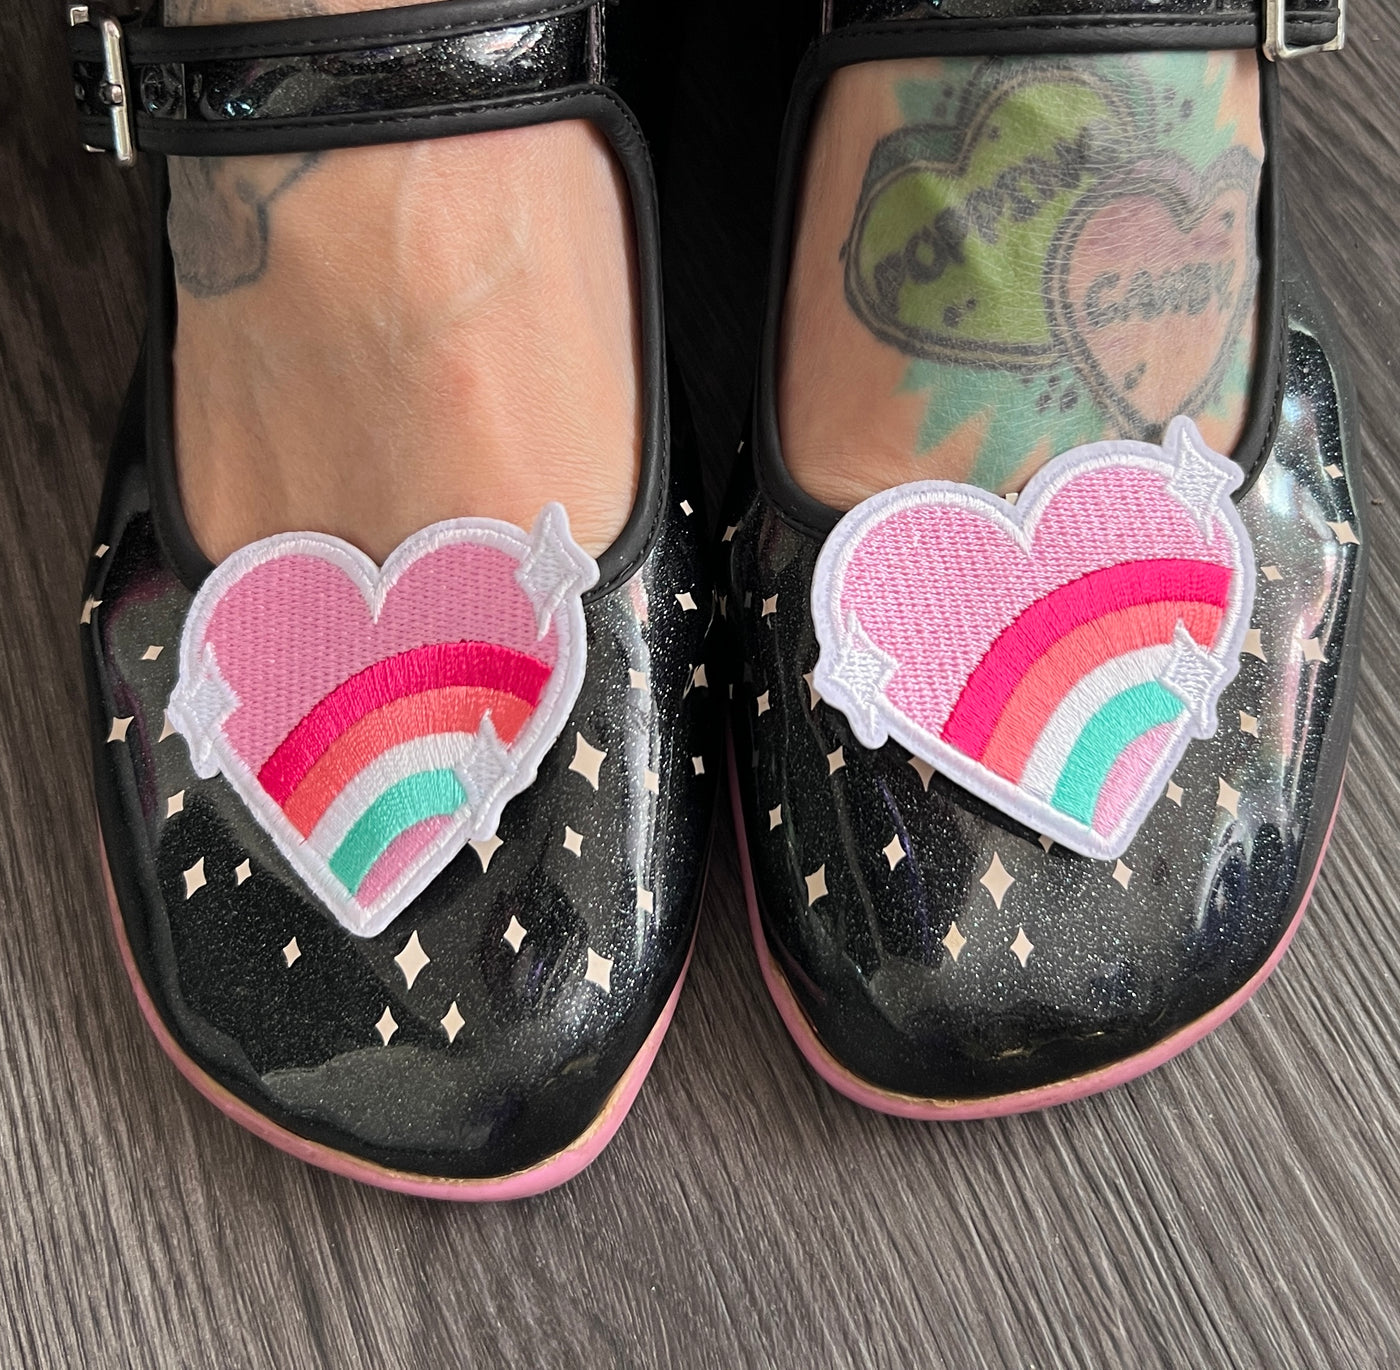 Popping Candy Shoe Clips - Pink Puffy Love